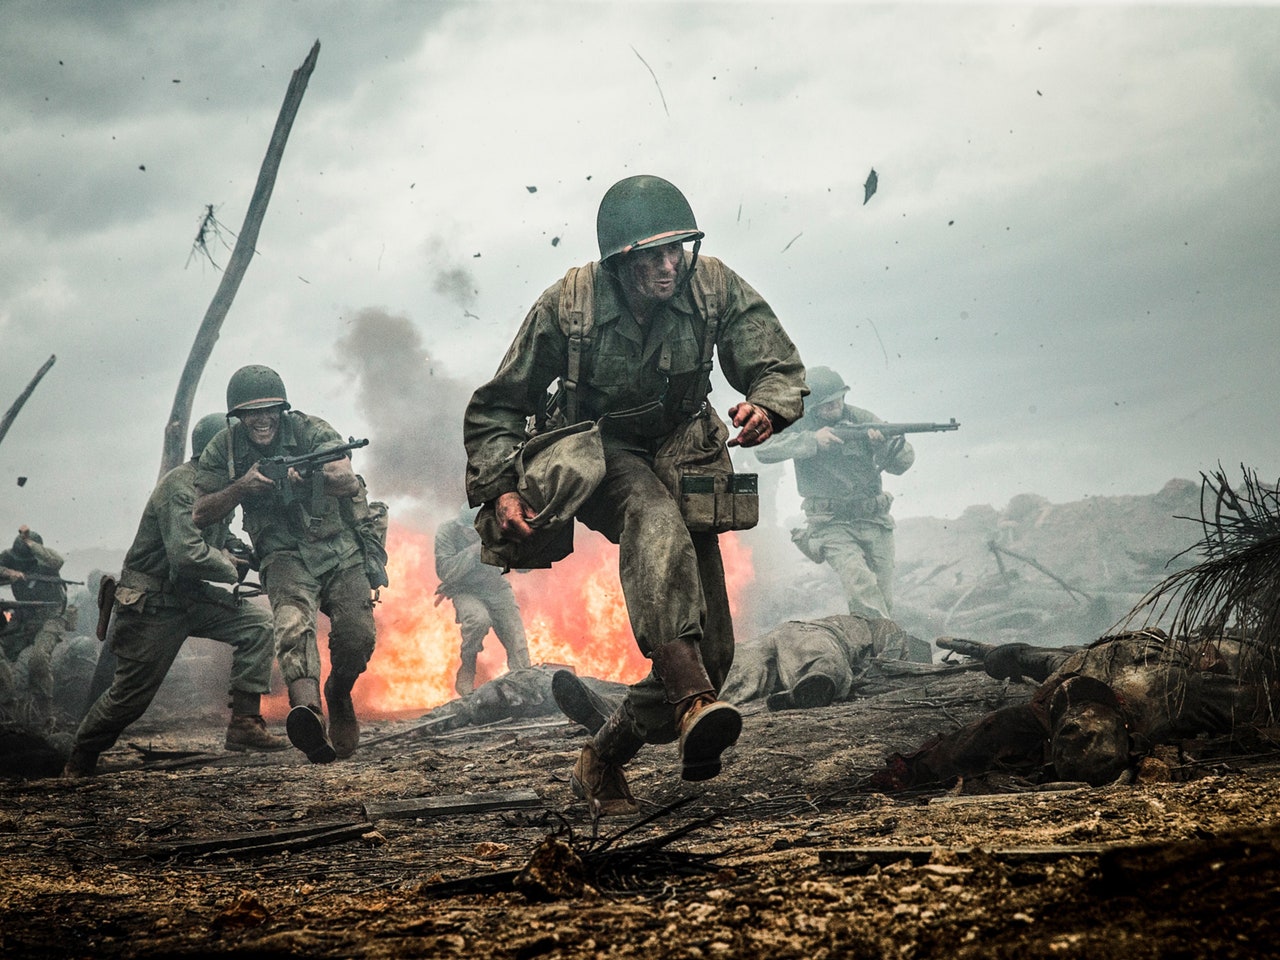 Mel Gibson’s “Hacksaw Ridge”: Religious Pomp Laced with Pornographic Violence